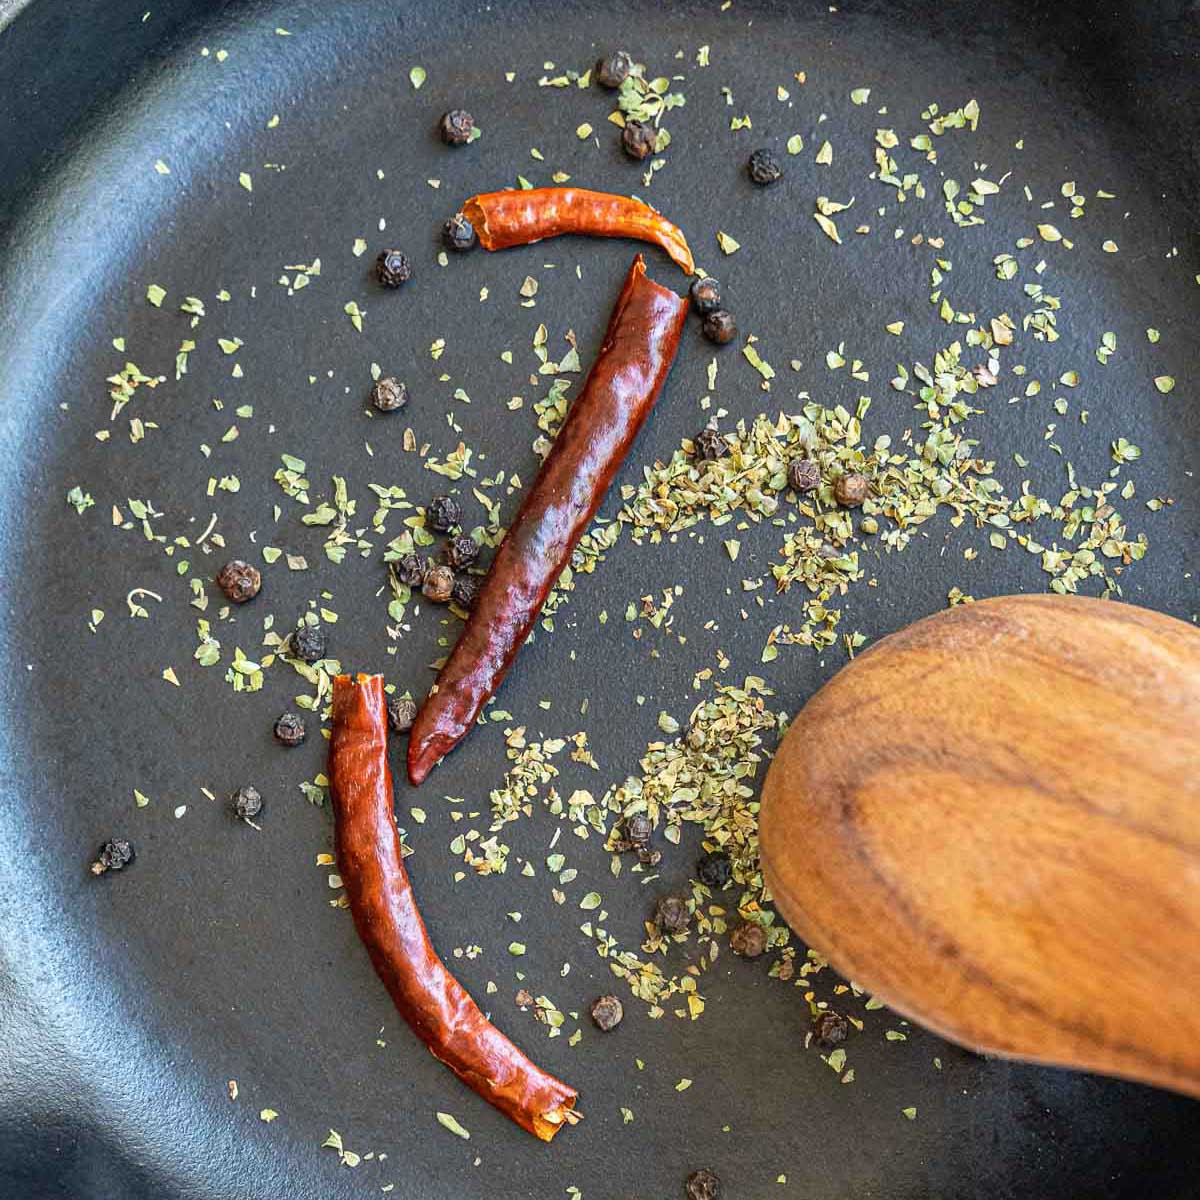 Sauteing the spices in a skillet.